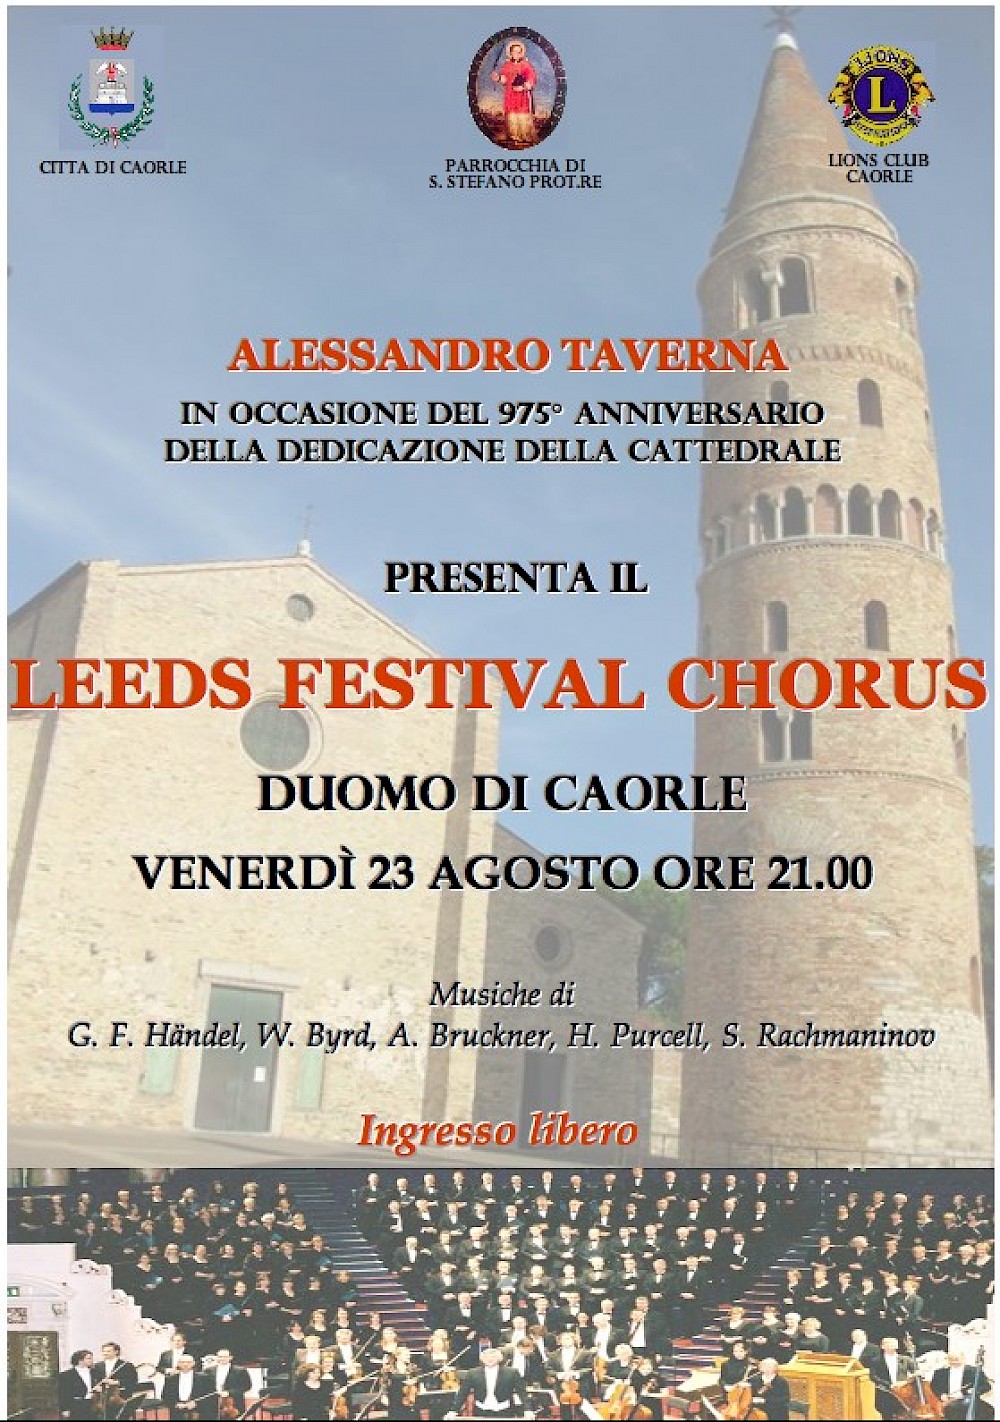 A poster for the concert at Caorle